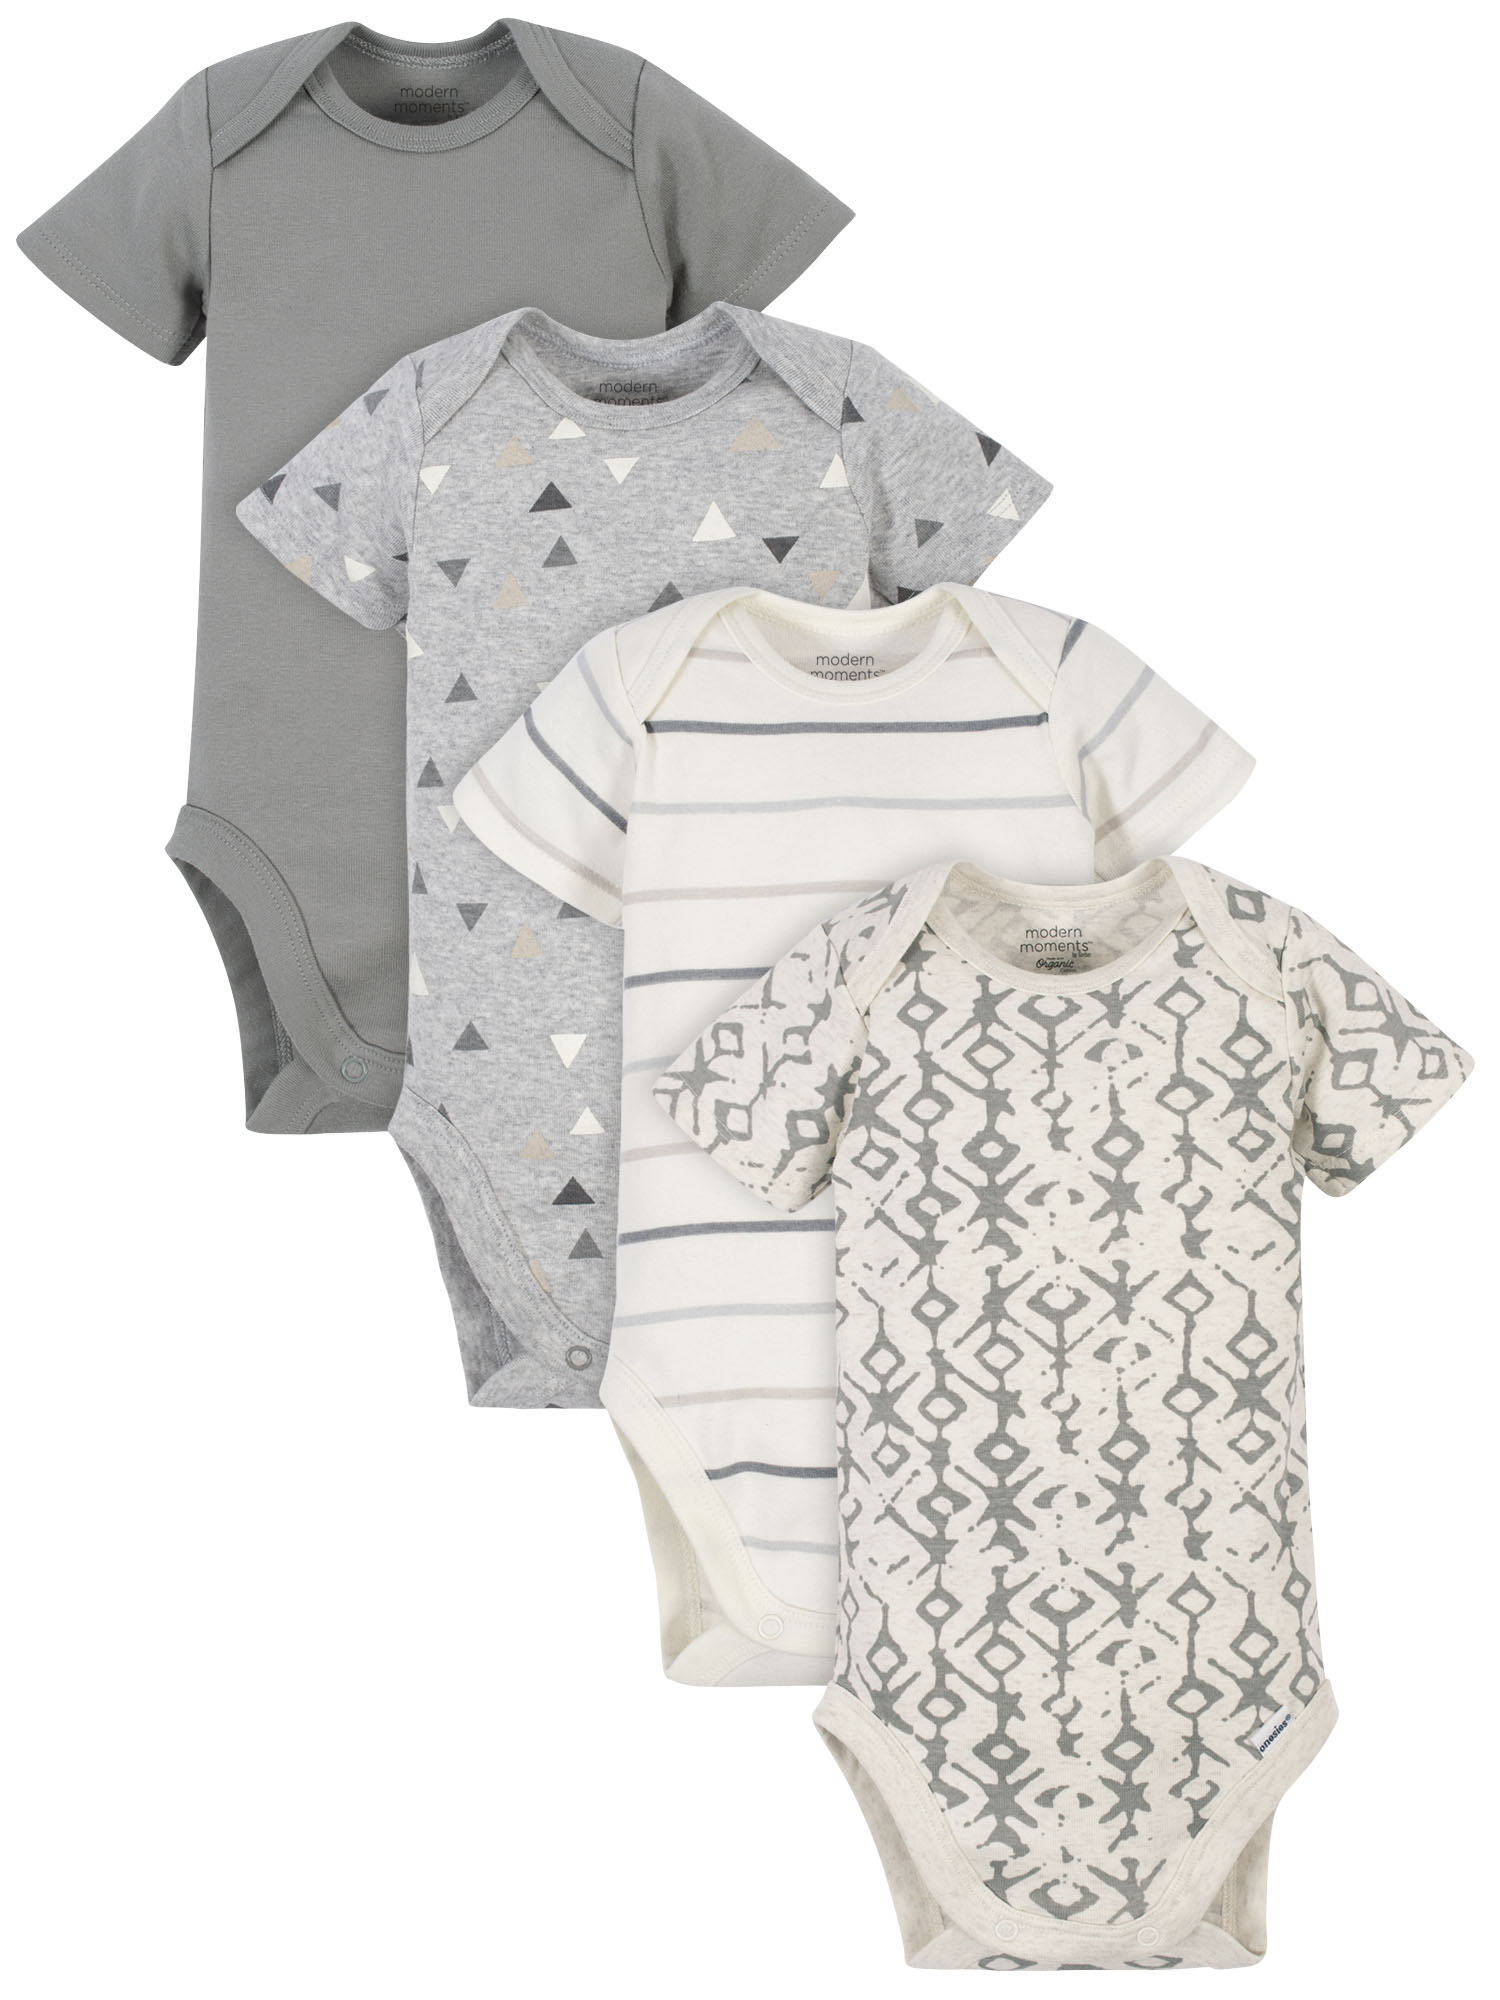 Modern Moments by Gerber Baby Boy Bodysuits, 4-Pack, Newborn-12 Months - image 1 of 6